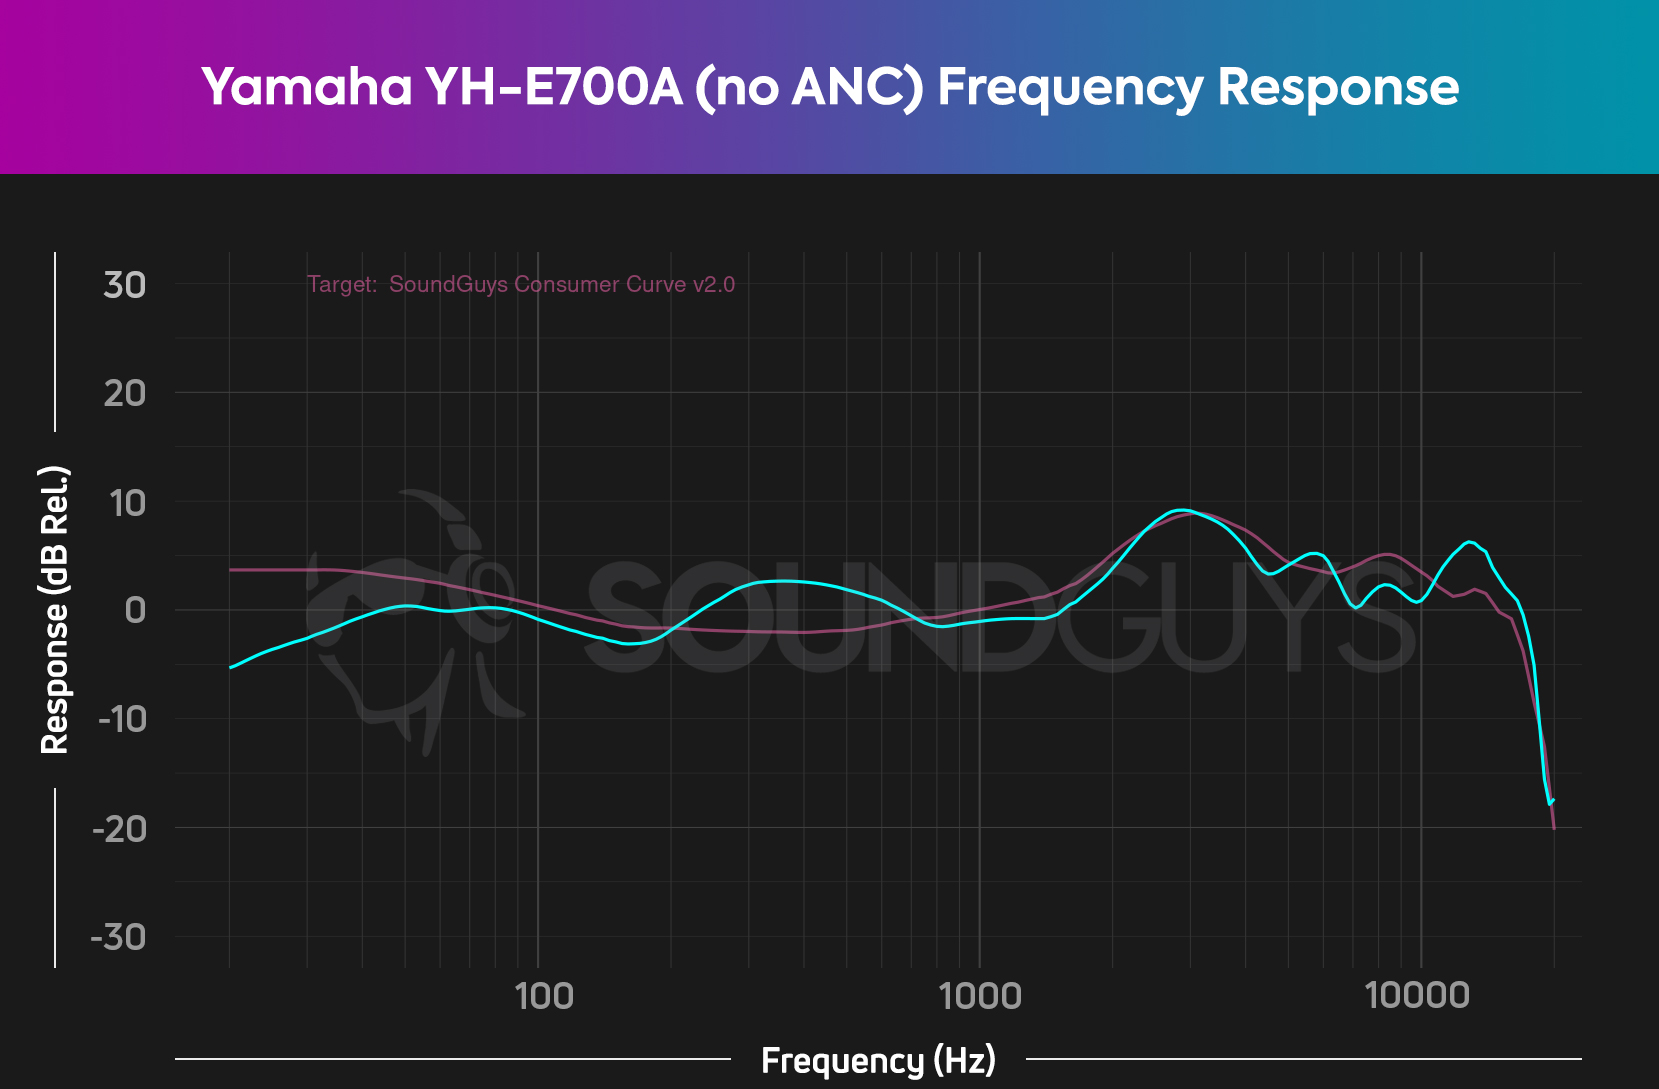 This chart depicts the standard listening frequency response of the Yamaha YH-E700A when ANC is off.